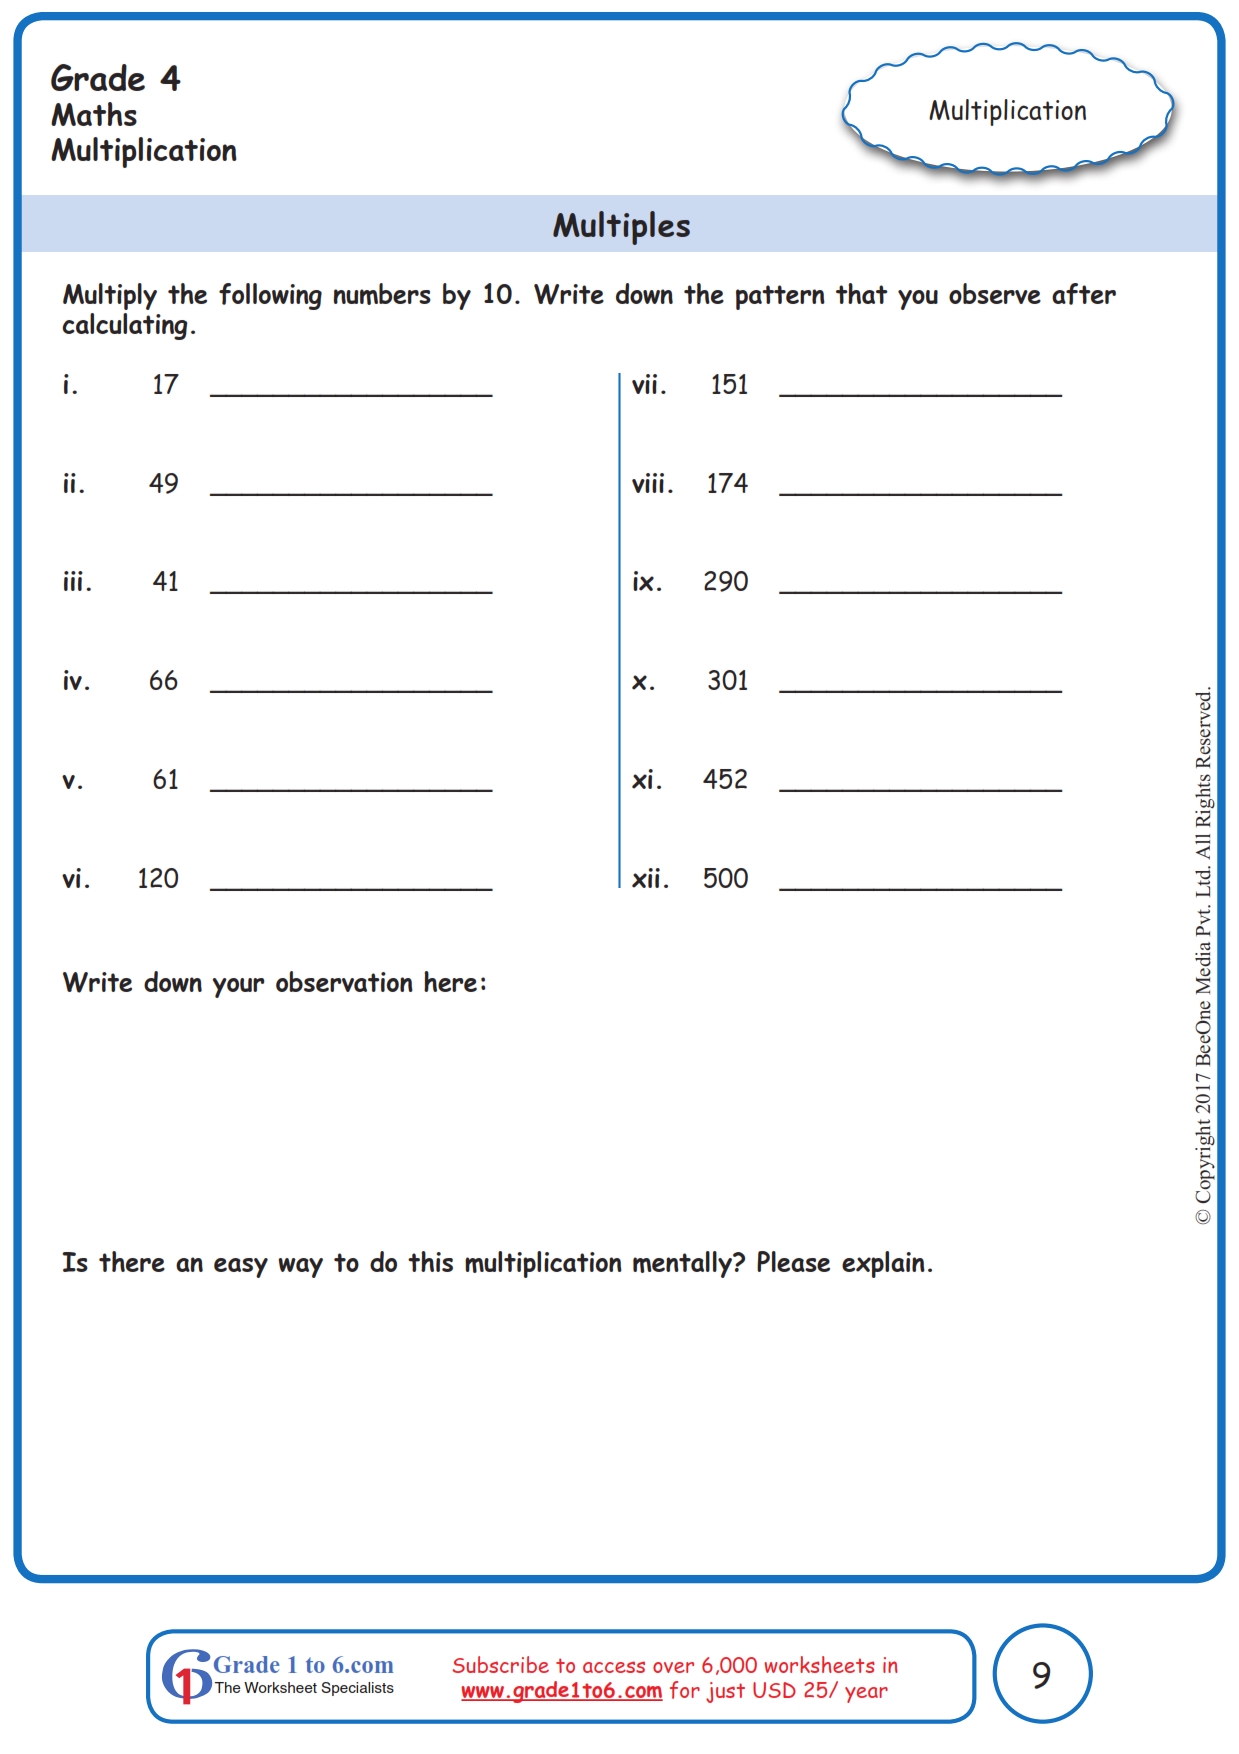 multiples-worksheets-www-grade1to6